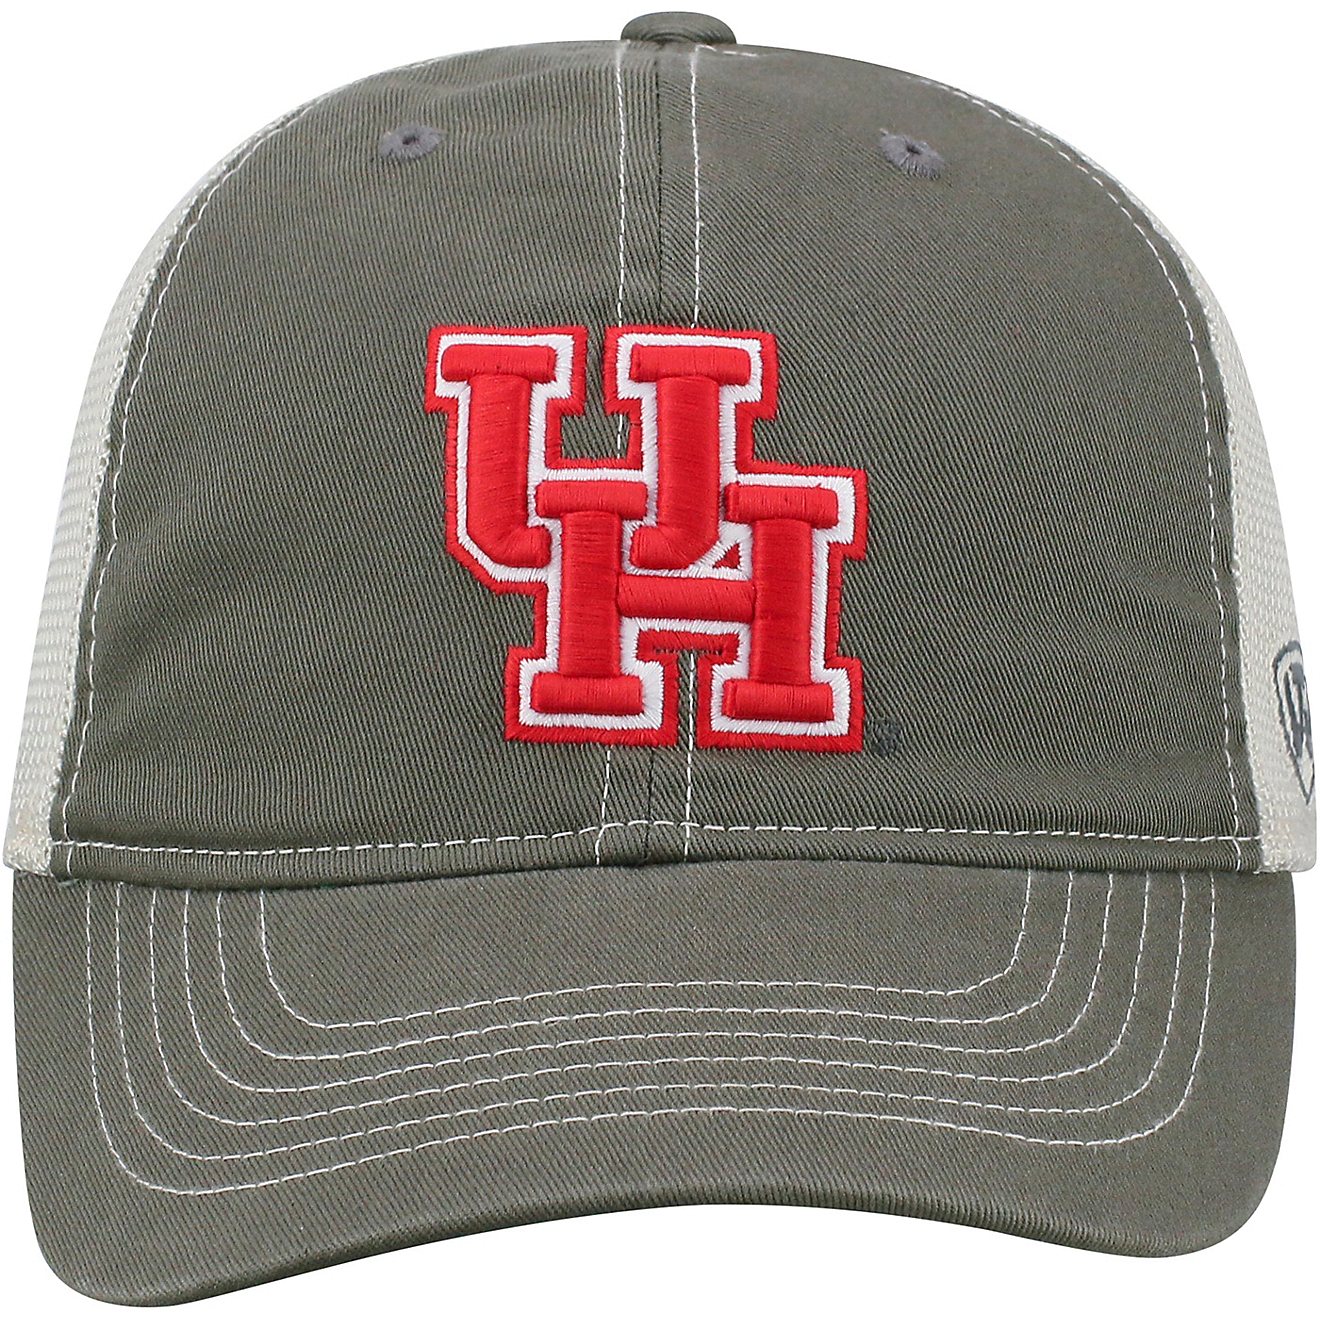 Top of the World Men's University of Houston Putty Cap                                                                           - view number 2